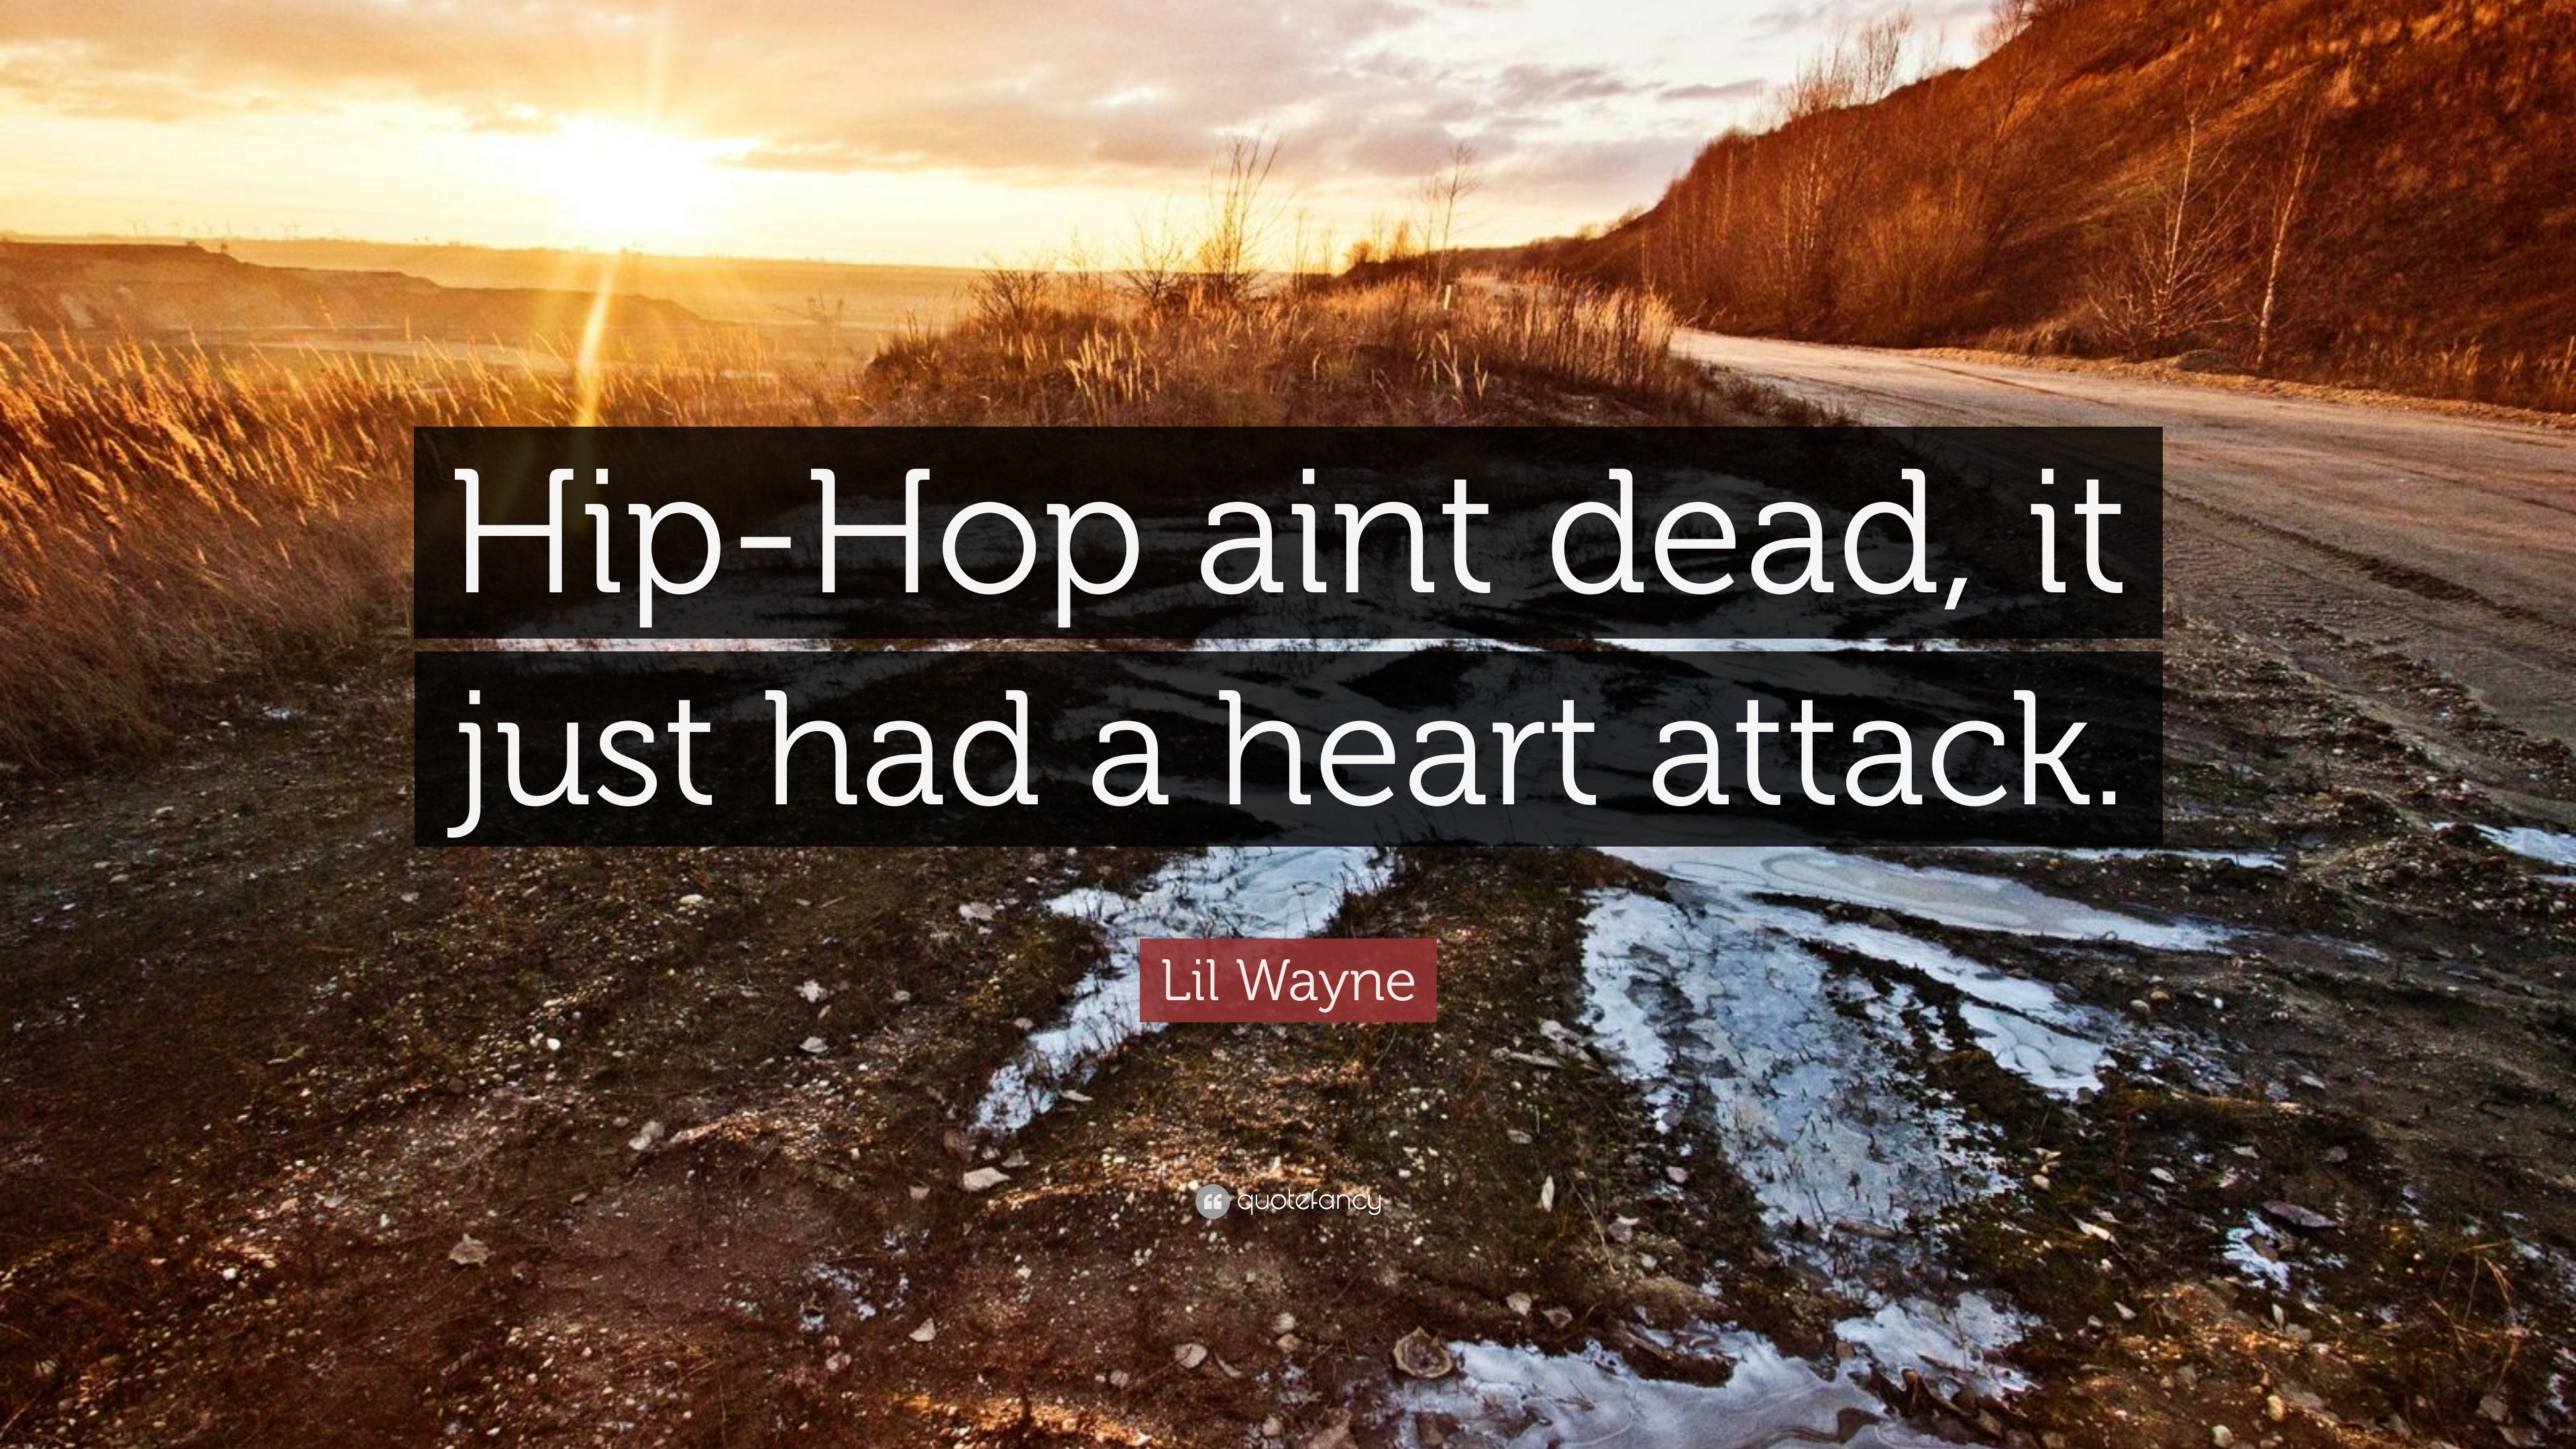 Lil Wayne Quote “Hip Hop aint dead it just had a heart